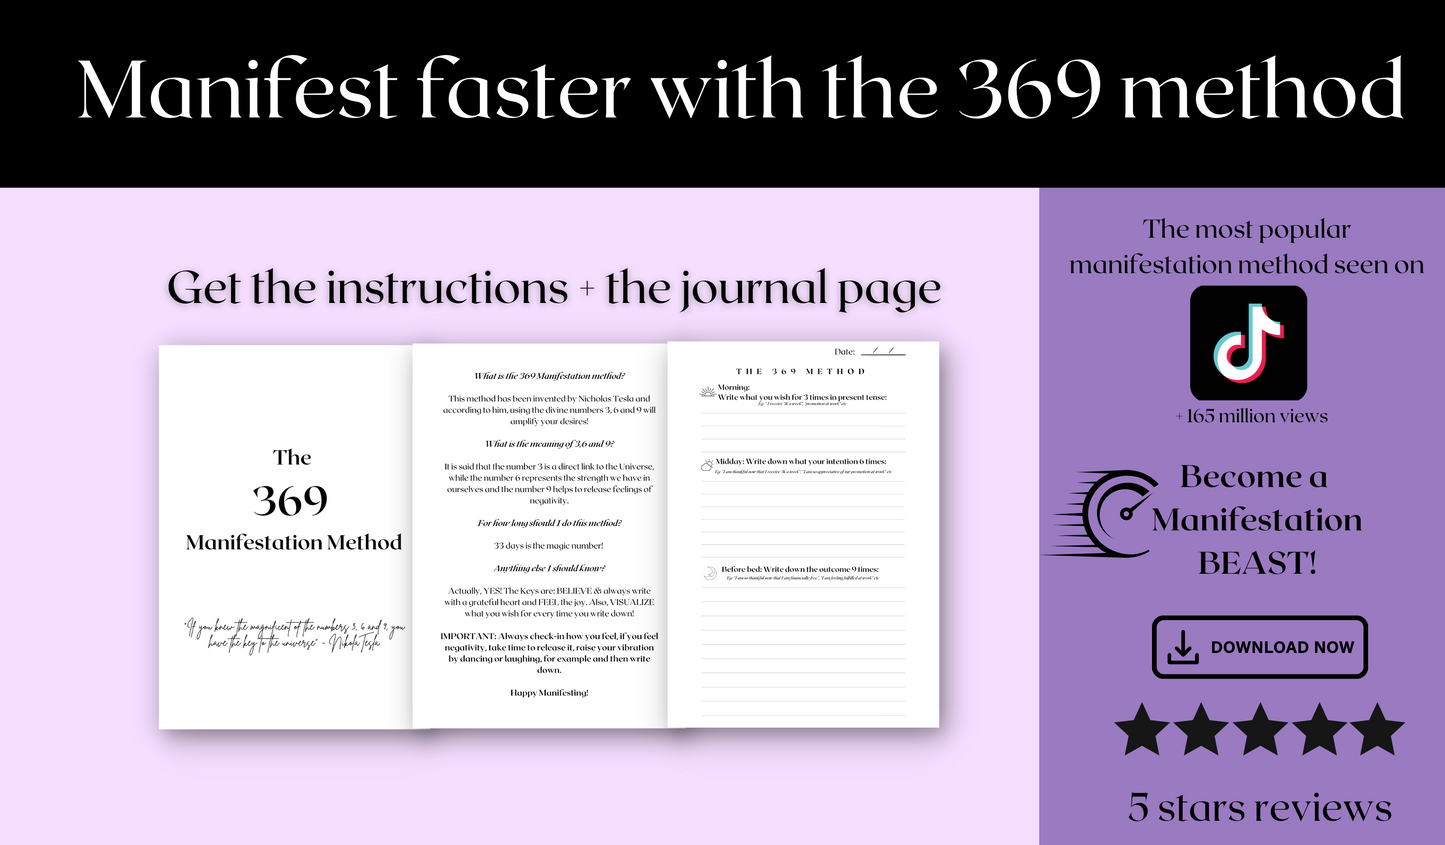 manifest faster with the 369 method